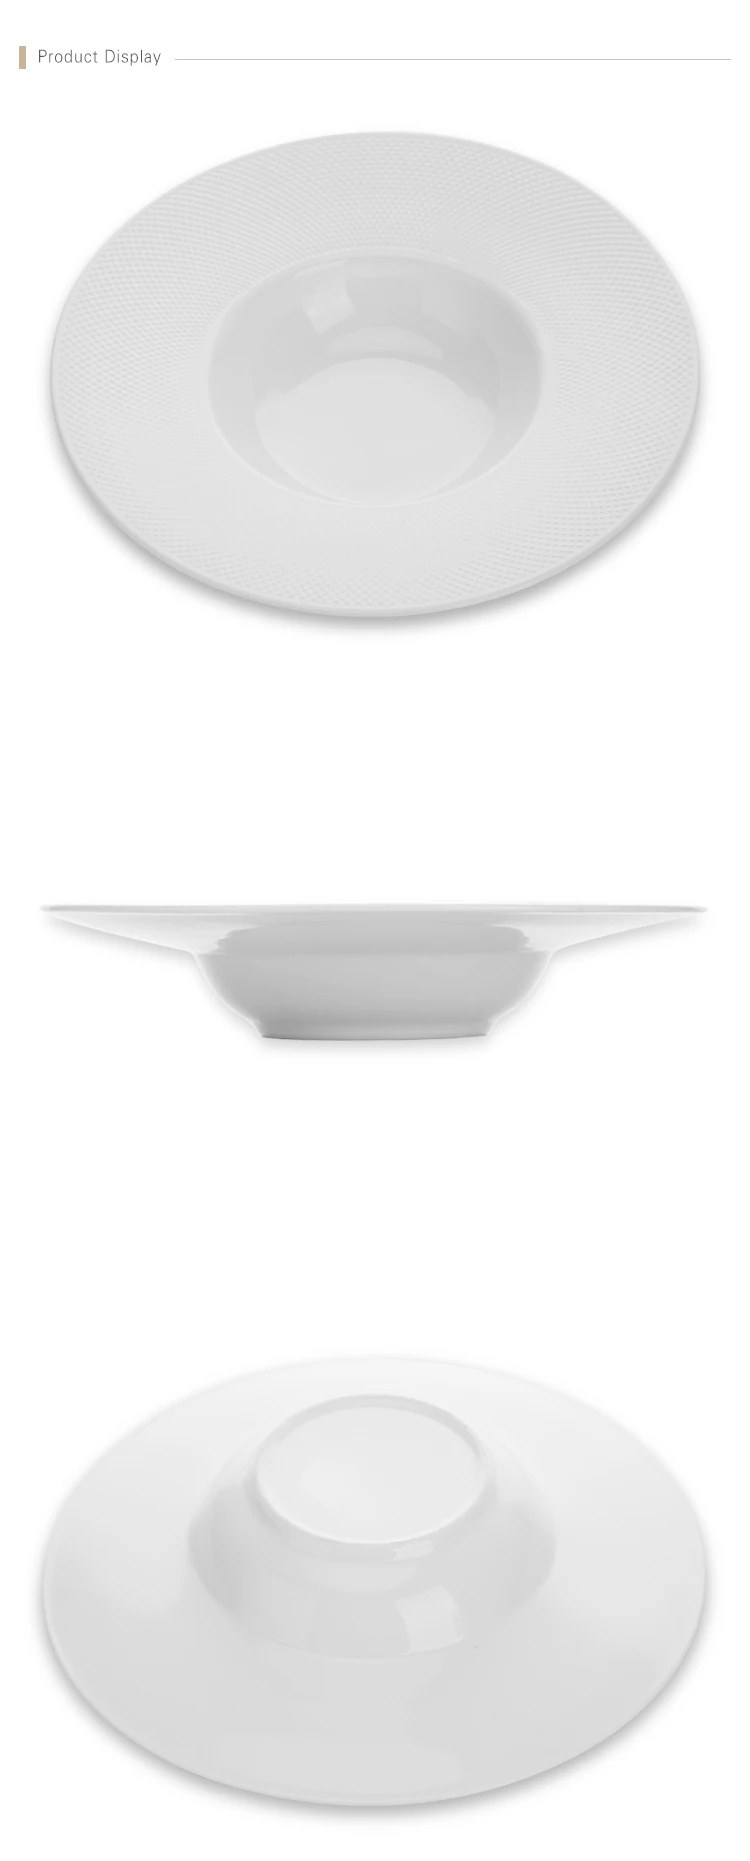 Wholesale Chaozhou Manufacturer Dinner Plate Printed, Mini Plate Restaurant Serving Dishes Wholesale Dessert Plate^